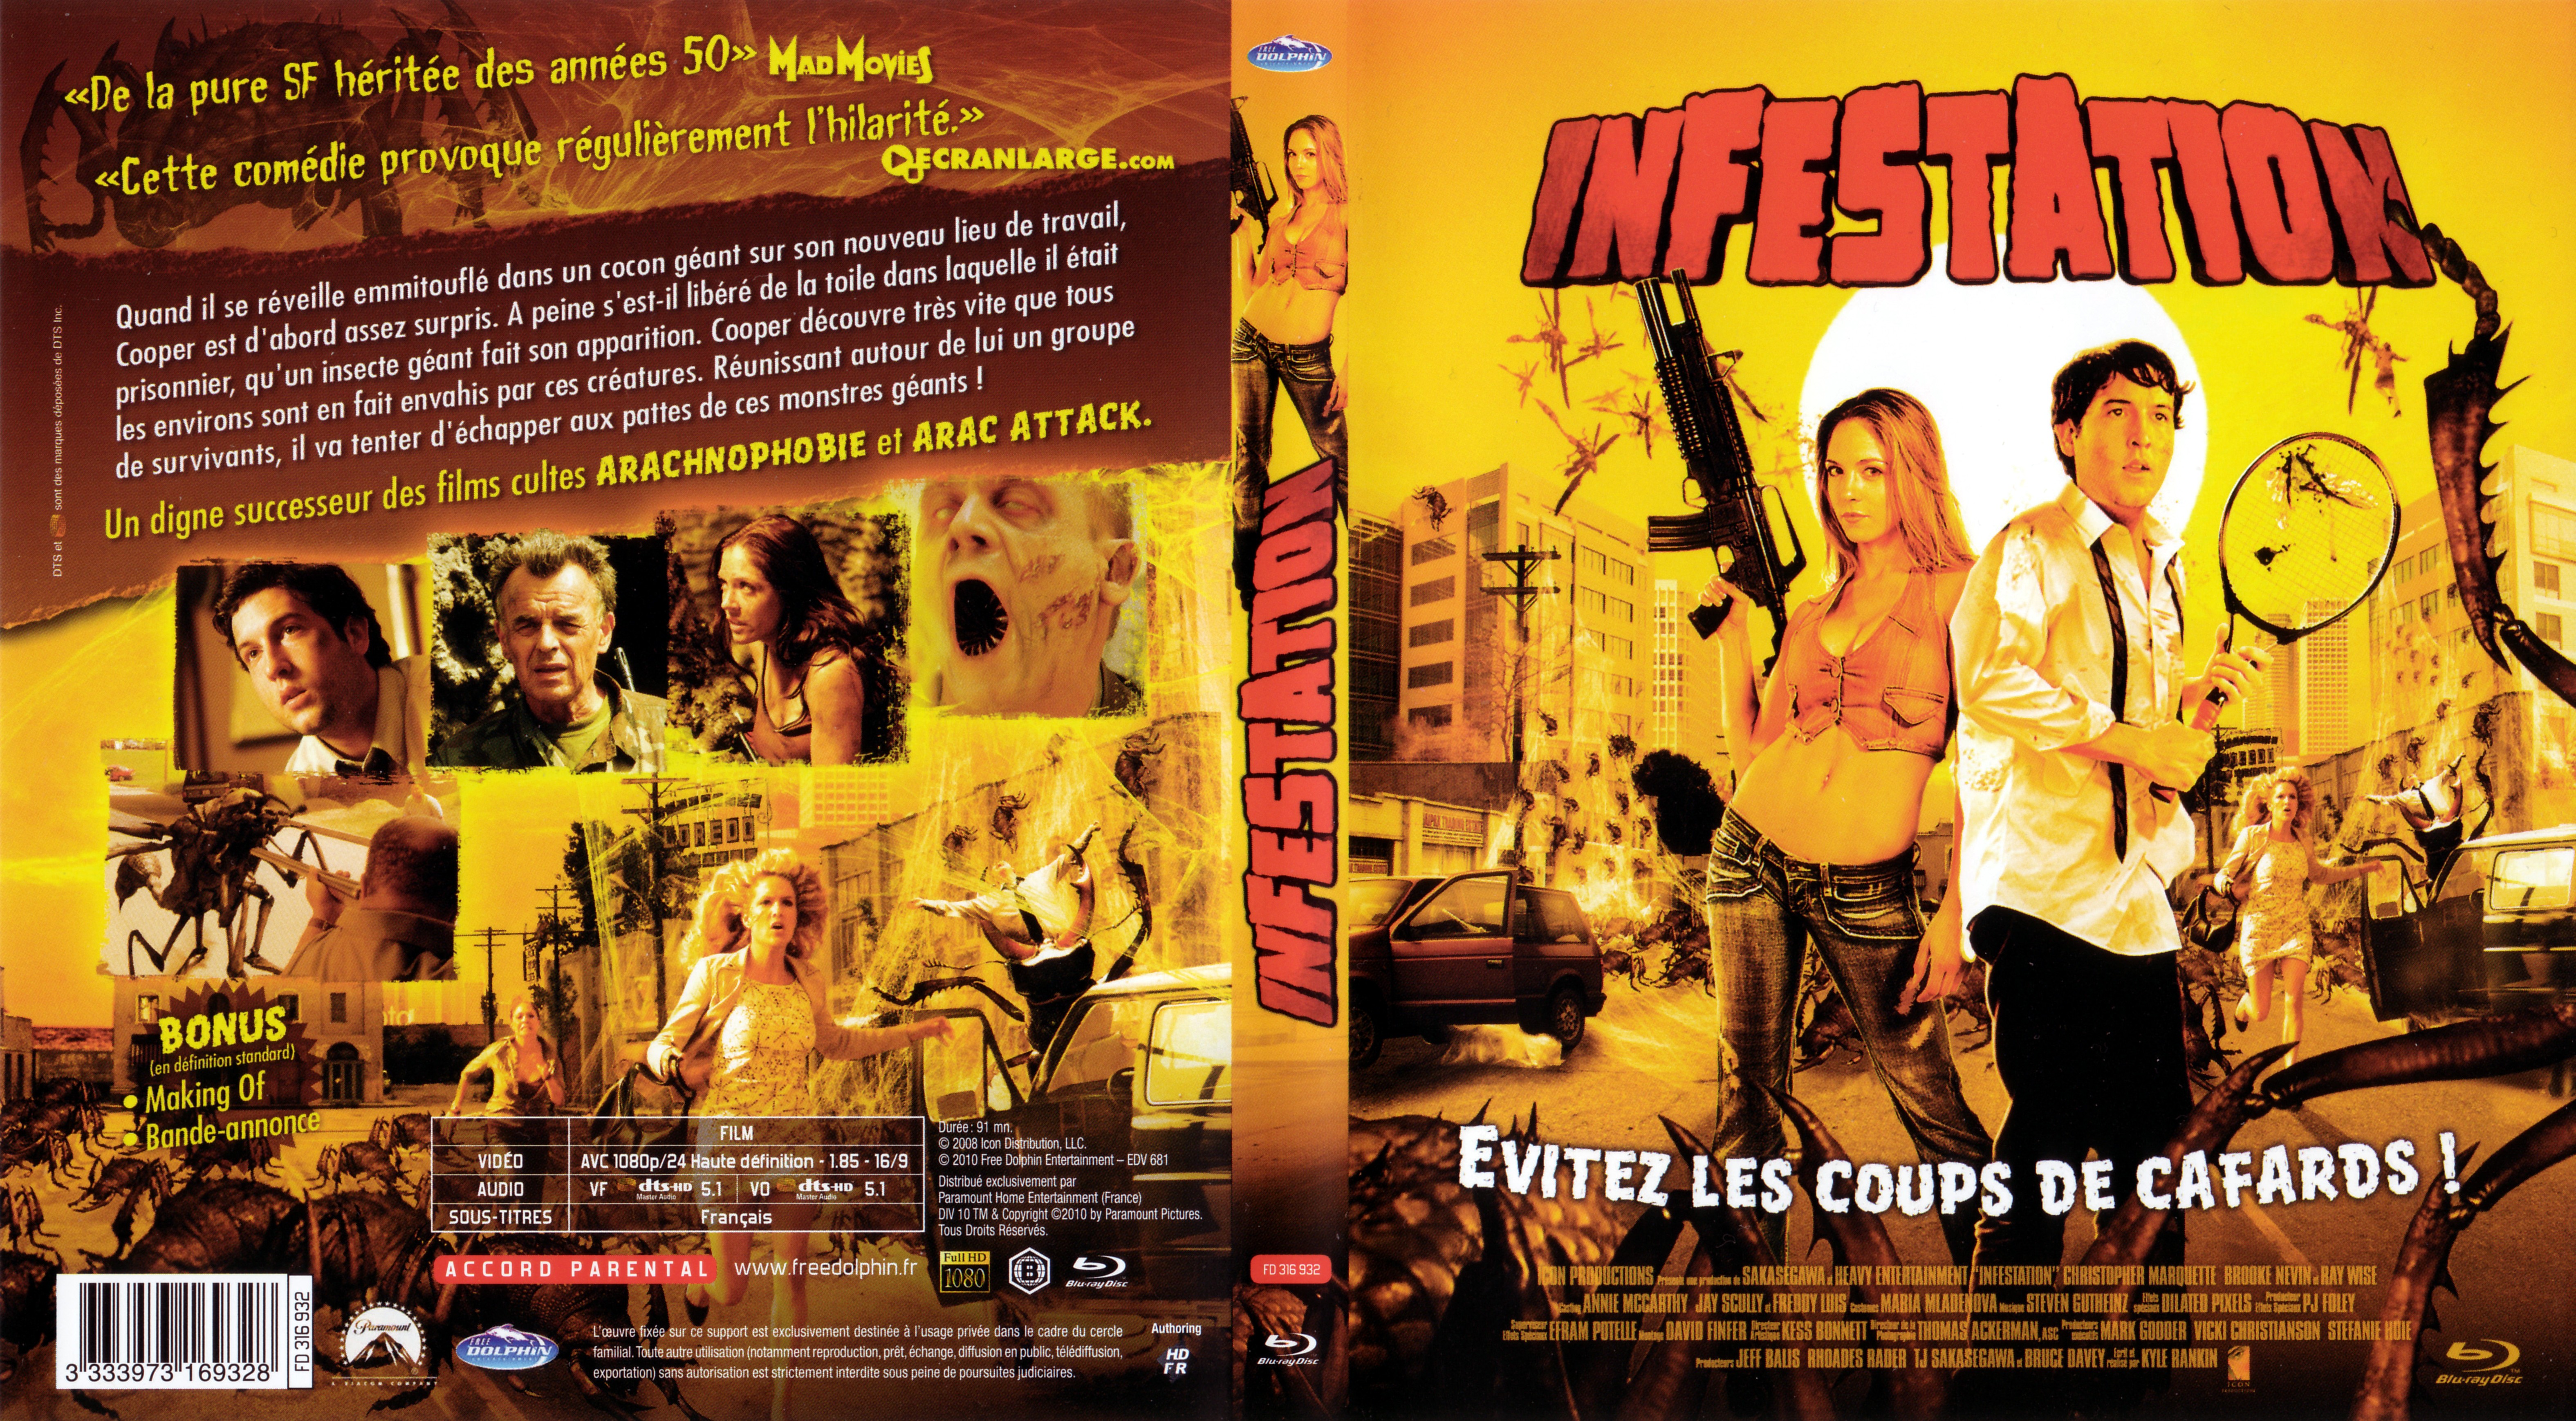 Jaquette DVD Infestation (BLU-RAY)